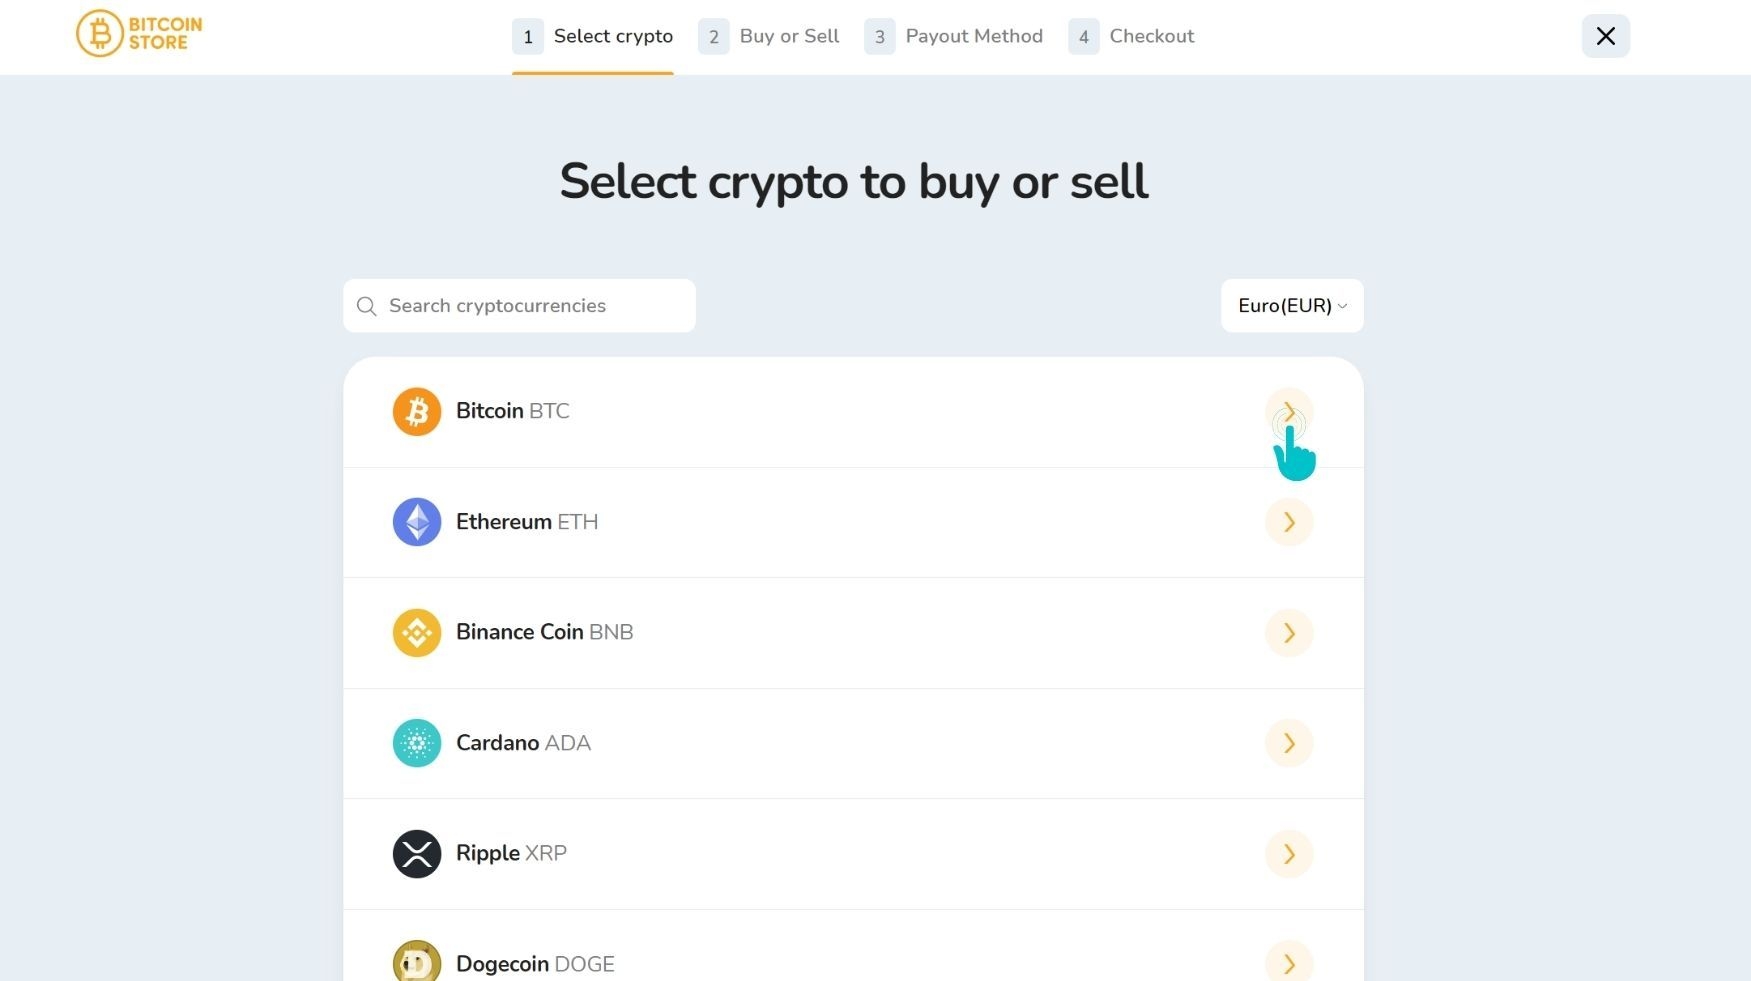 The list of cryptocurrencies on the Bitcoin Store platform.